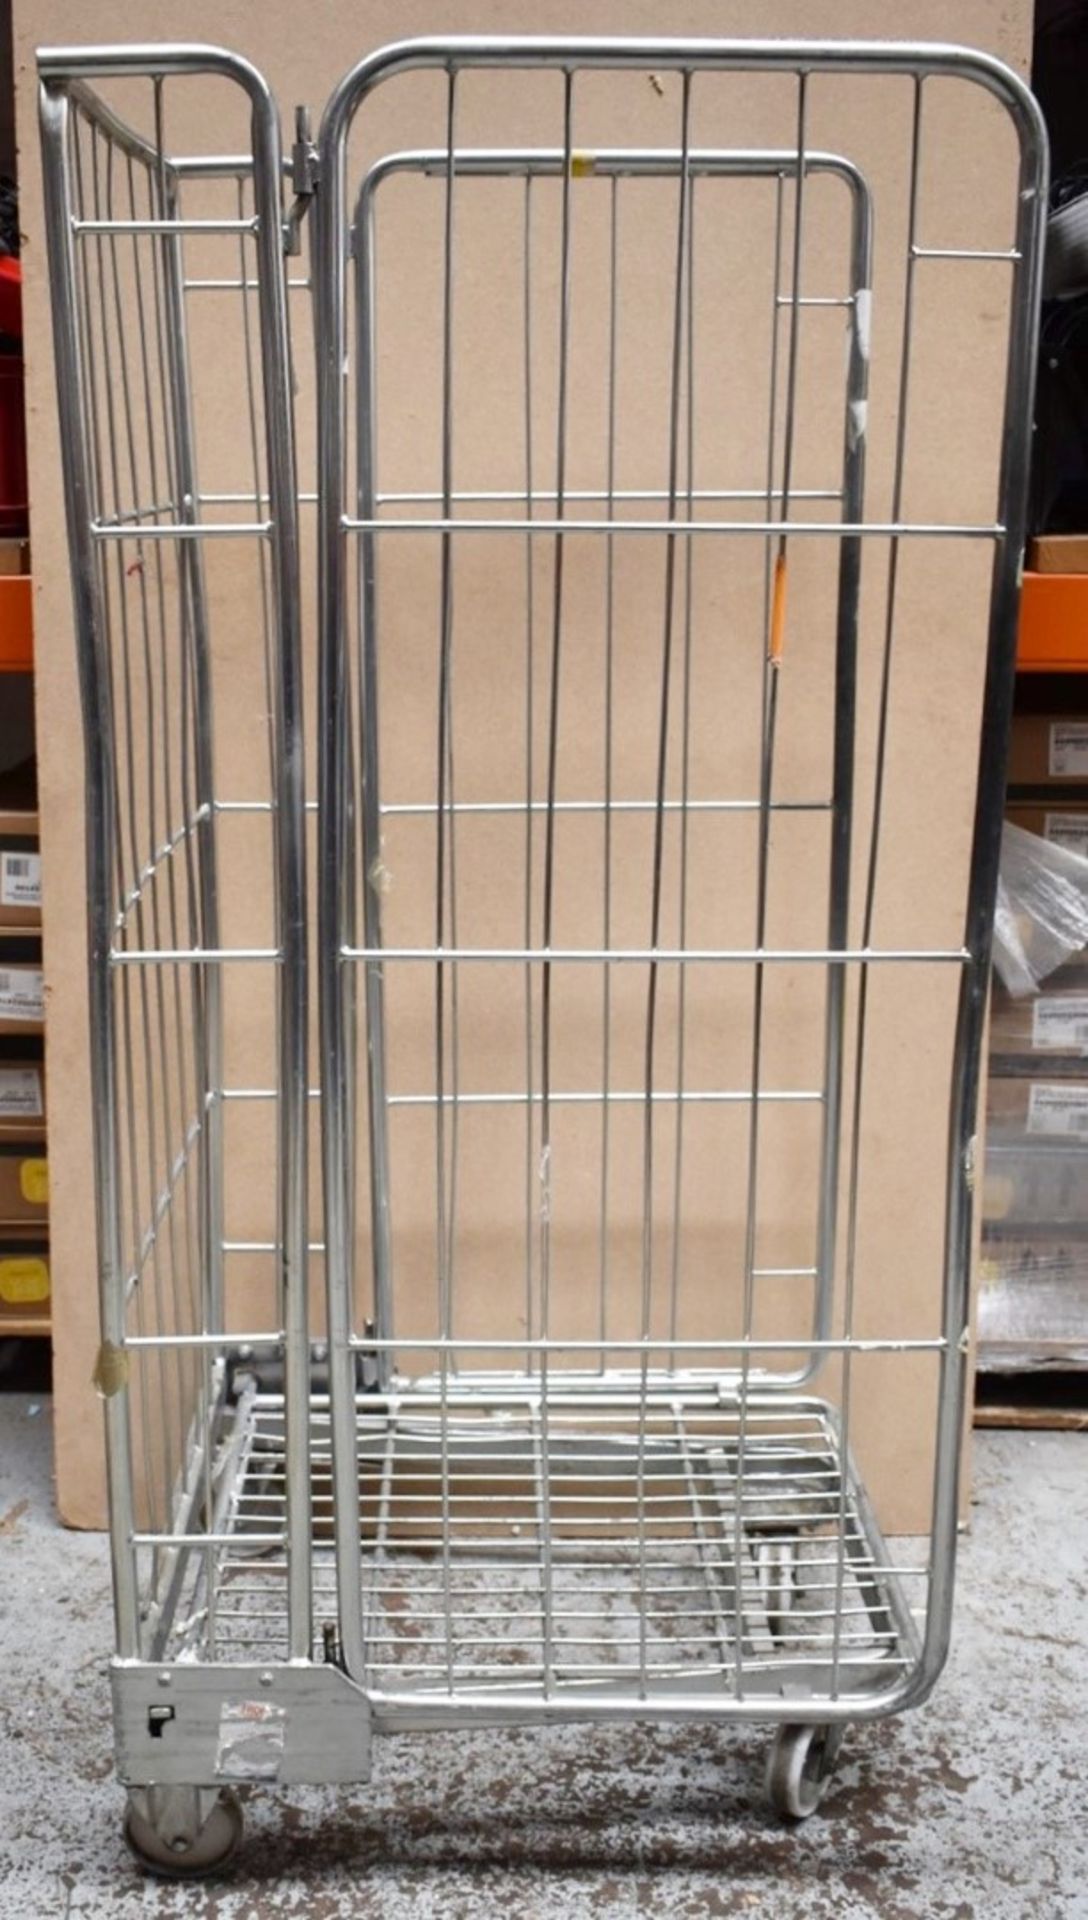 4 x Roller Cages With Heavy Duty Castors - Demountable With Three Sides - Ideal For Storing and - Image 7 of 11